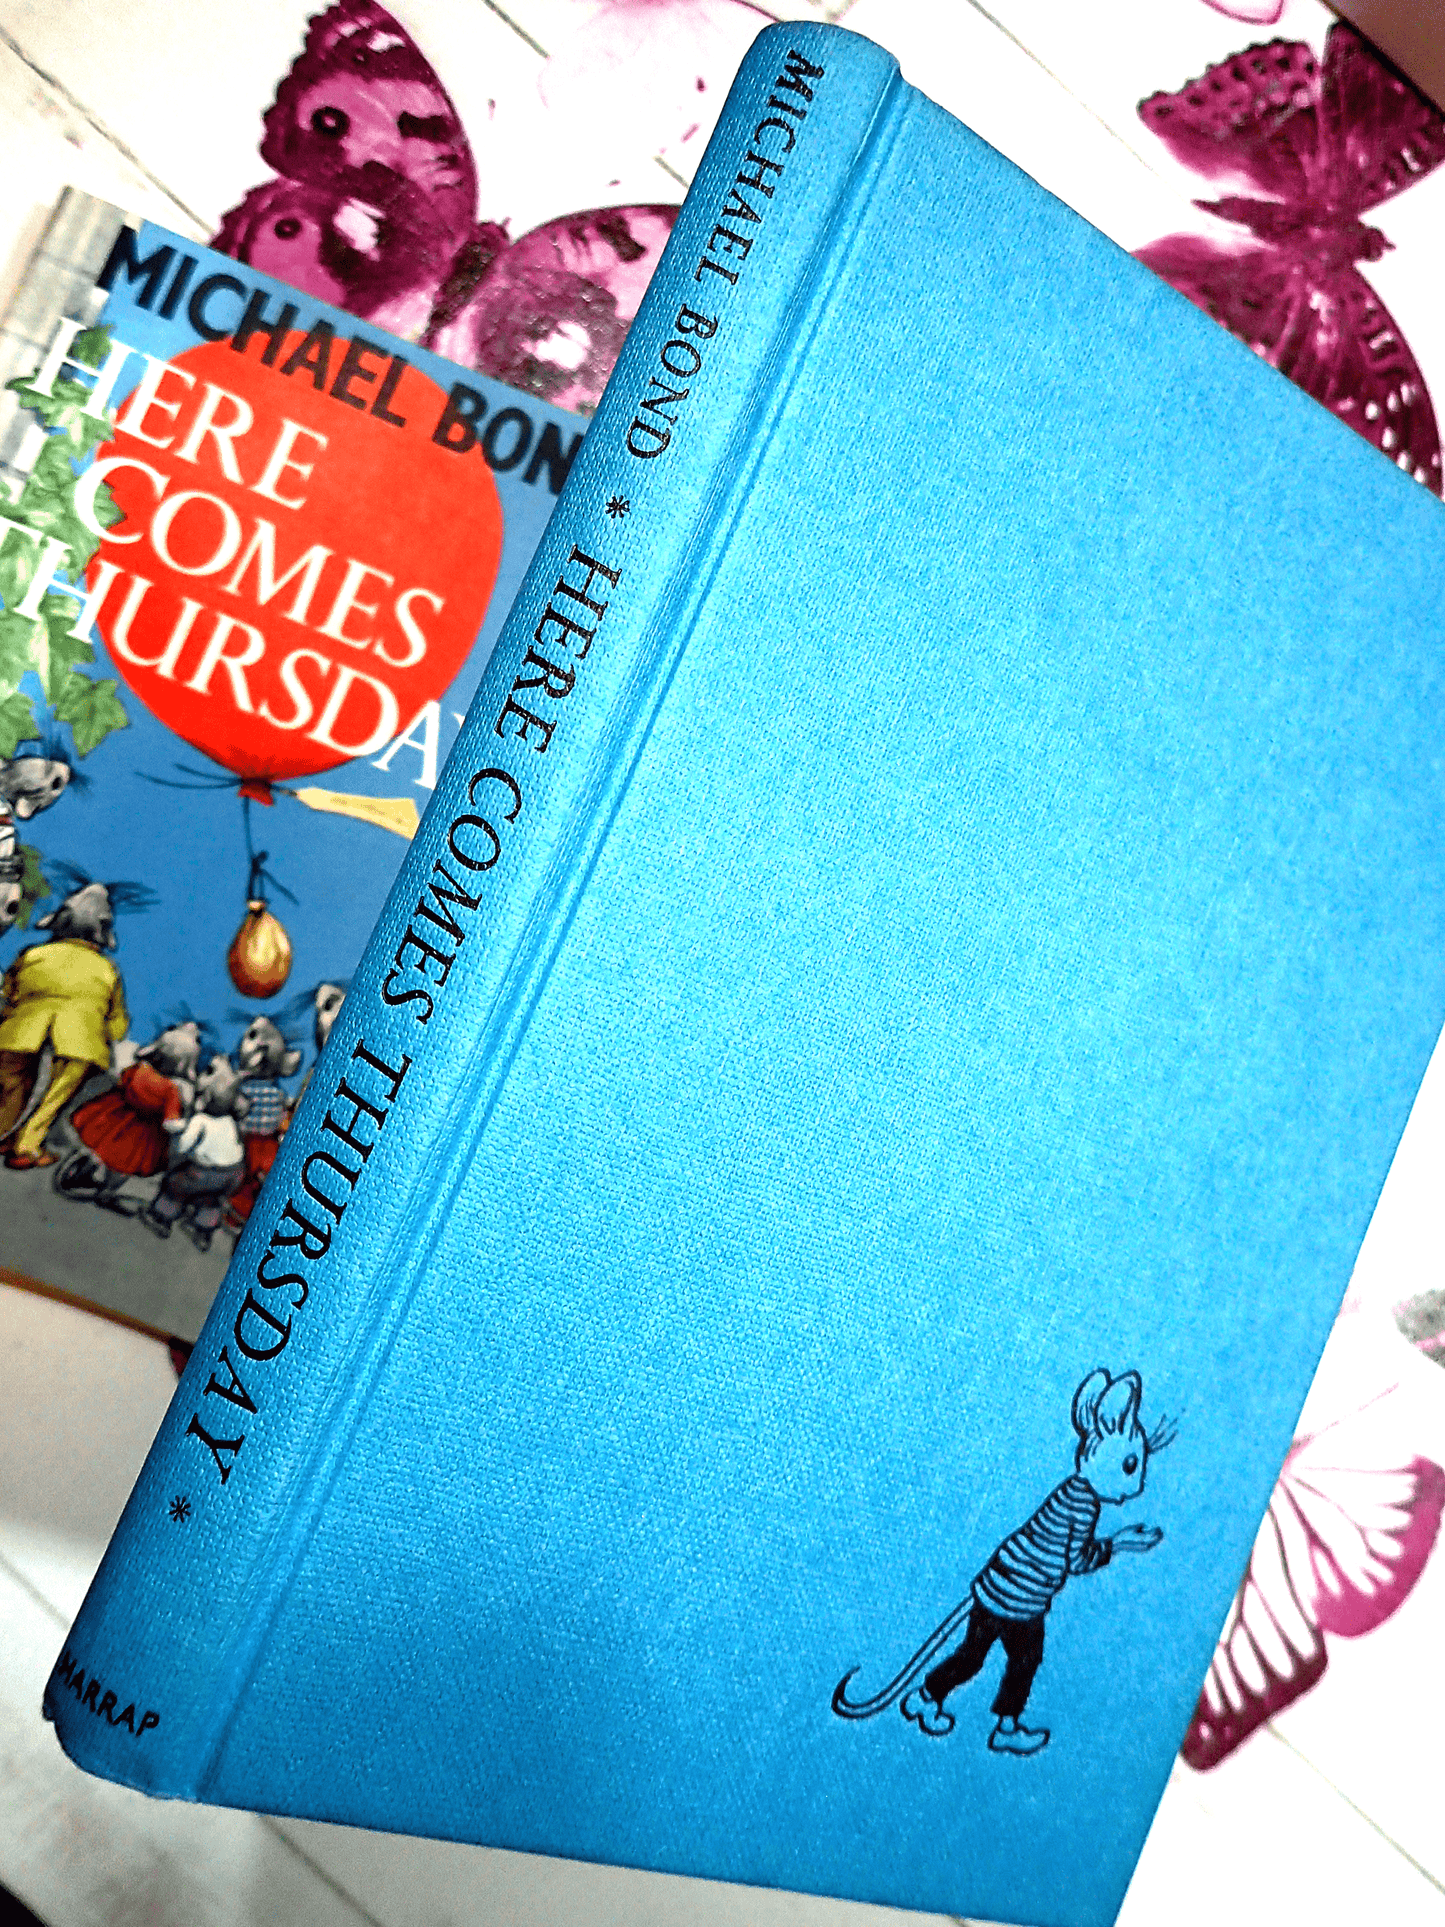 Here Comes Thursday Michael Bond Vintage Children's Book First Edition 1970's with blue boards and embossed image of a mouse in a sweater.